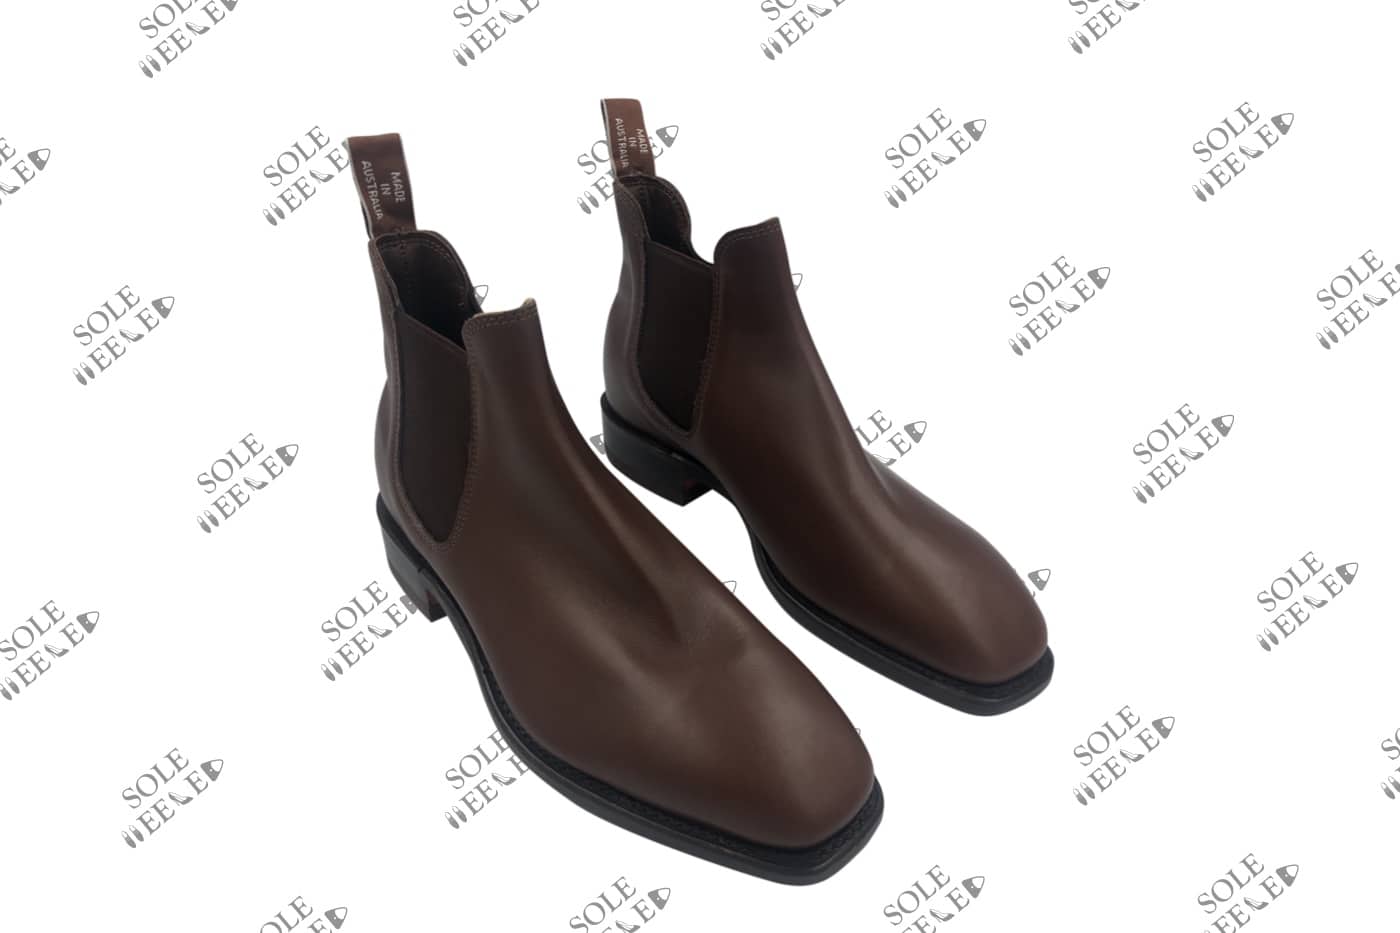 R.M. Williams Boots Protective Soles